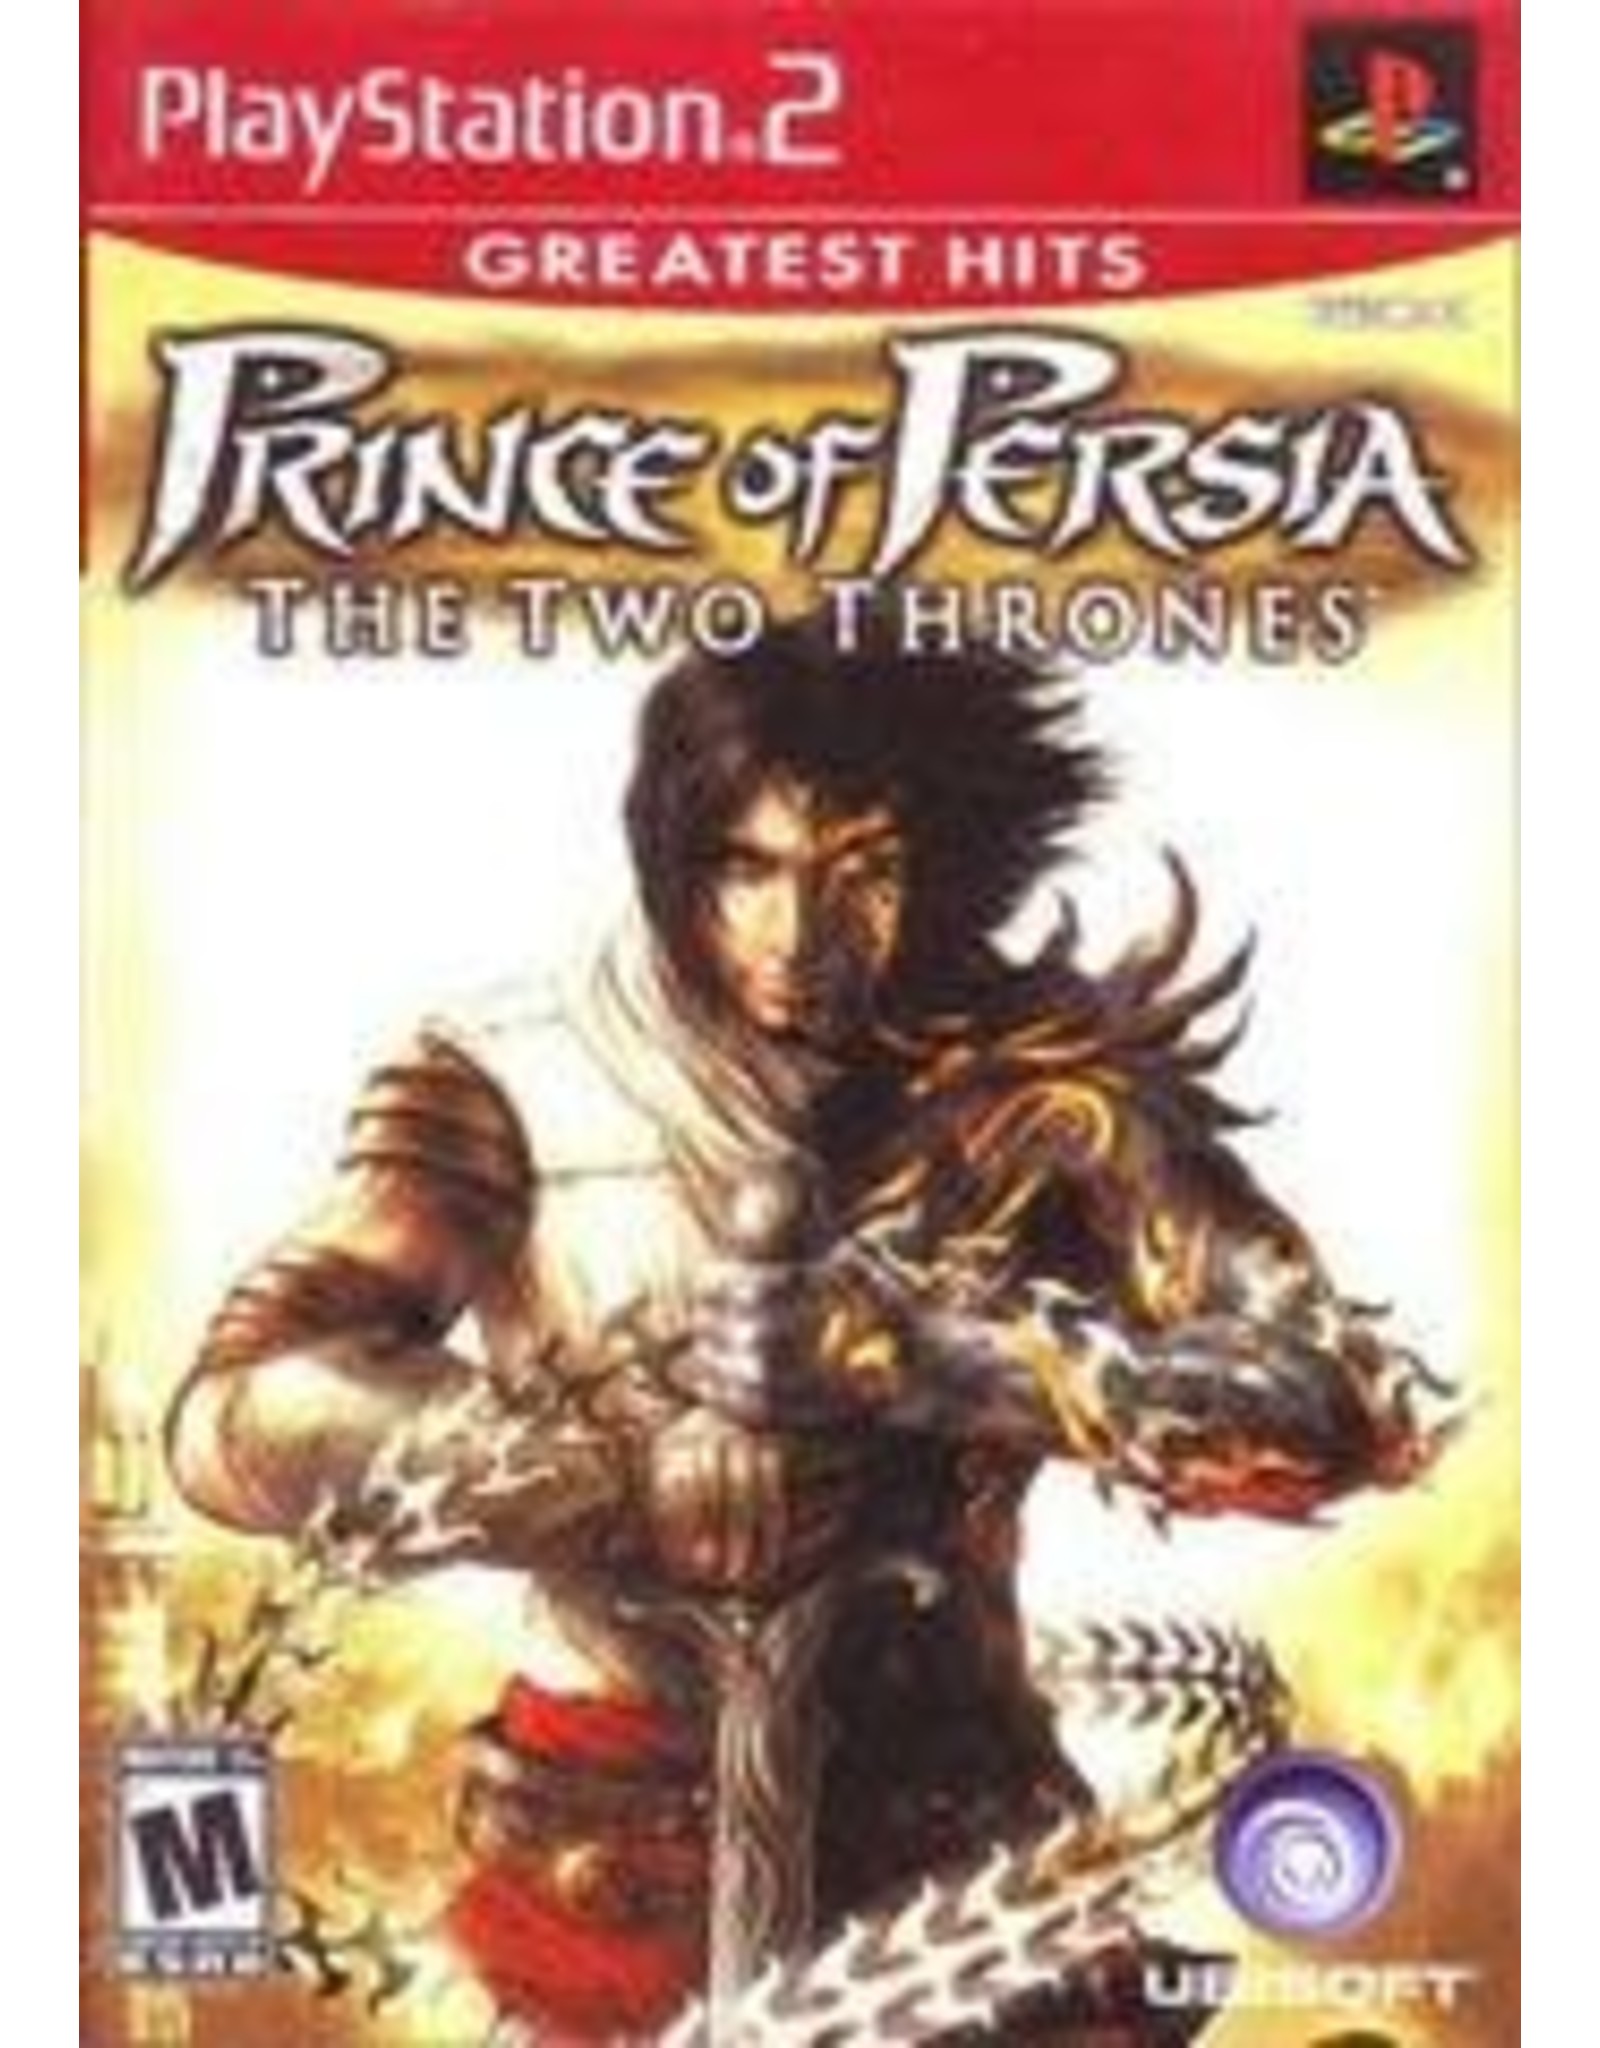 Playstation 2 Prince of Persia Two Thrones (Greatest Hits, CiB)